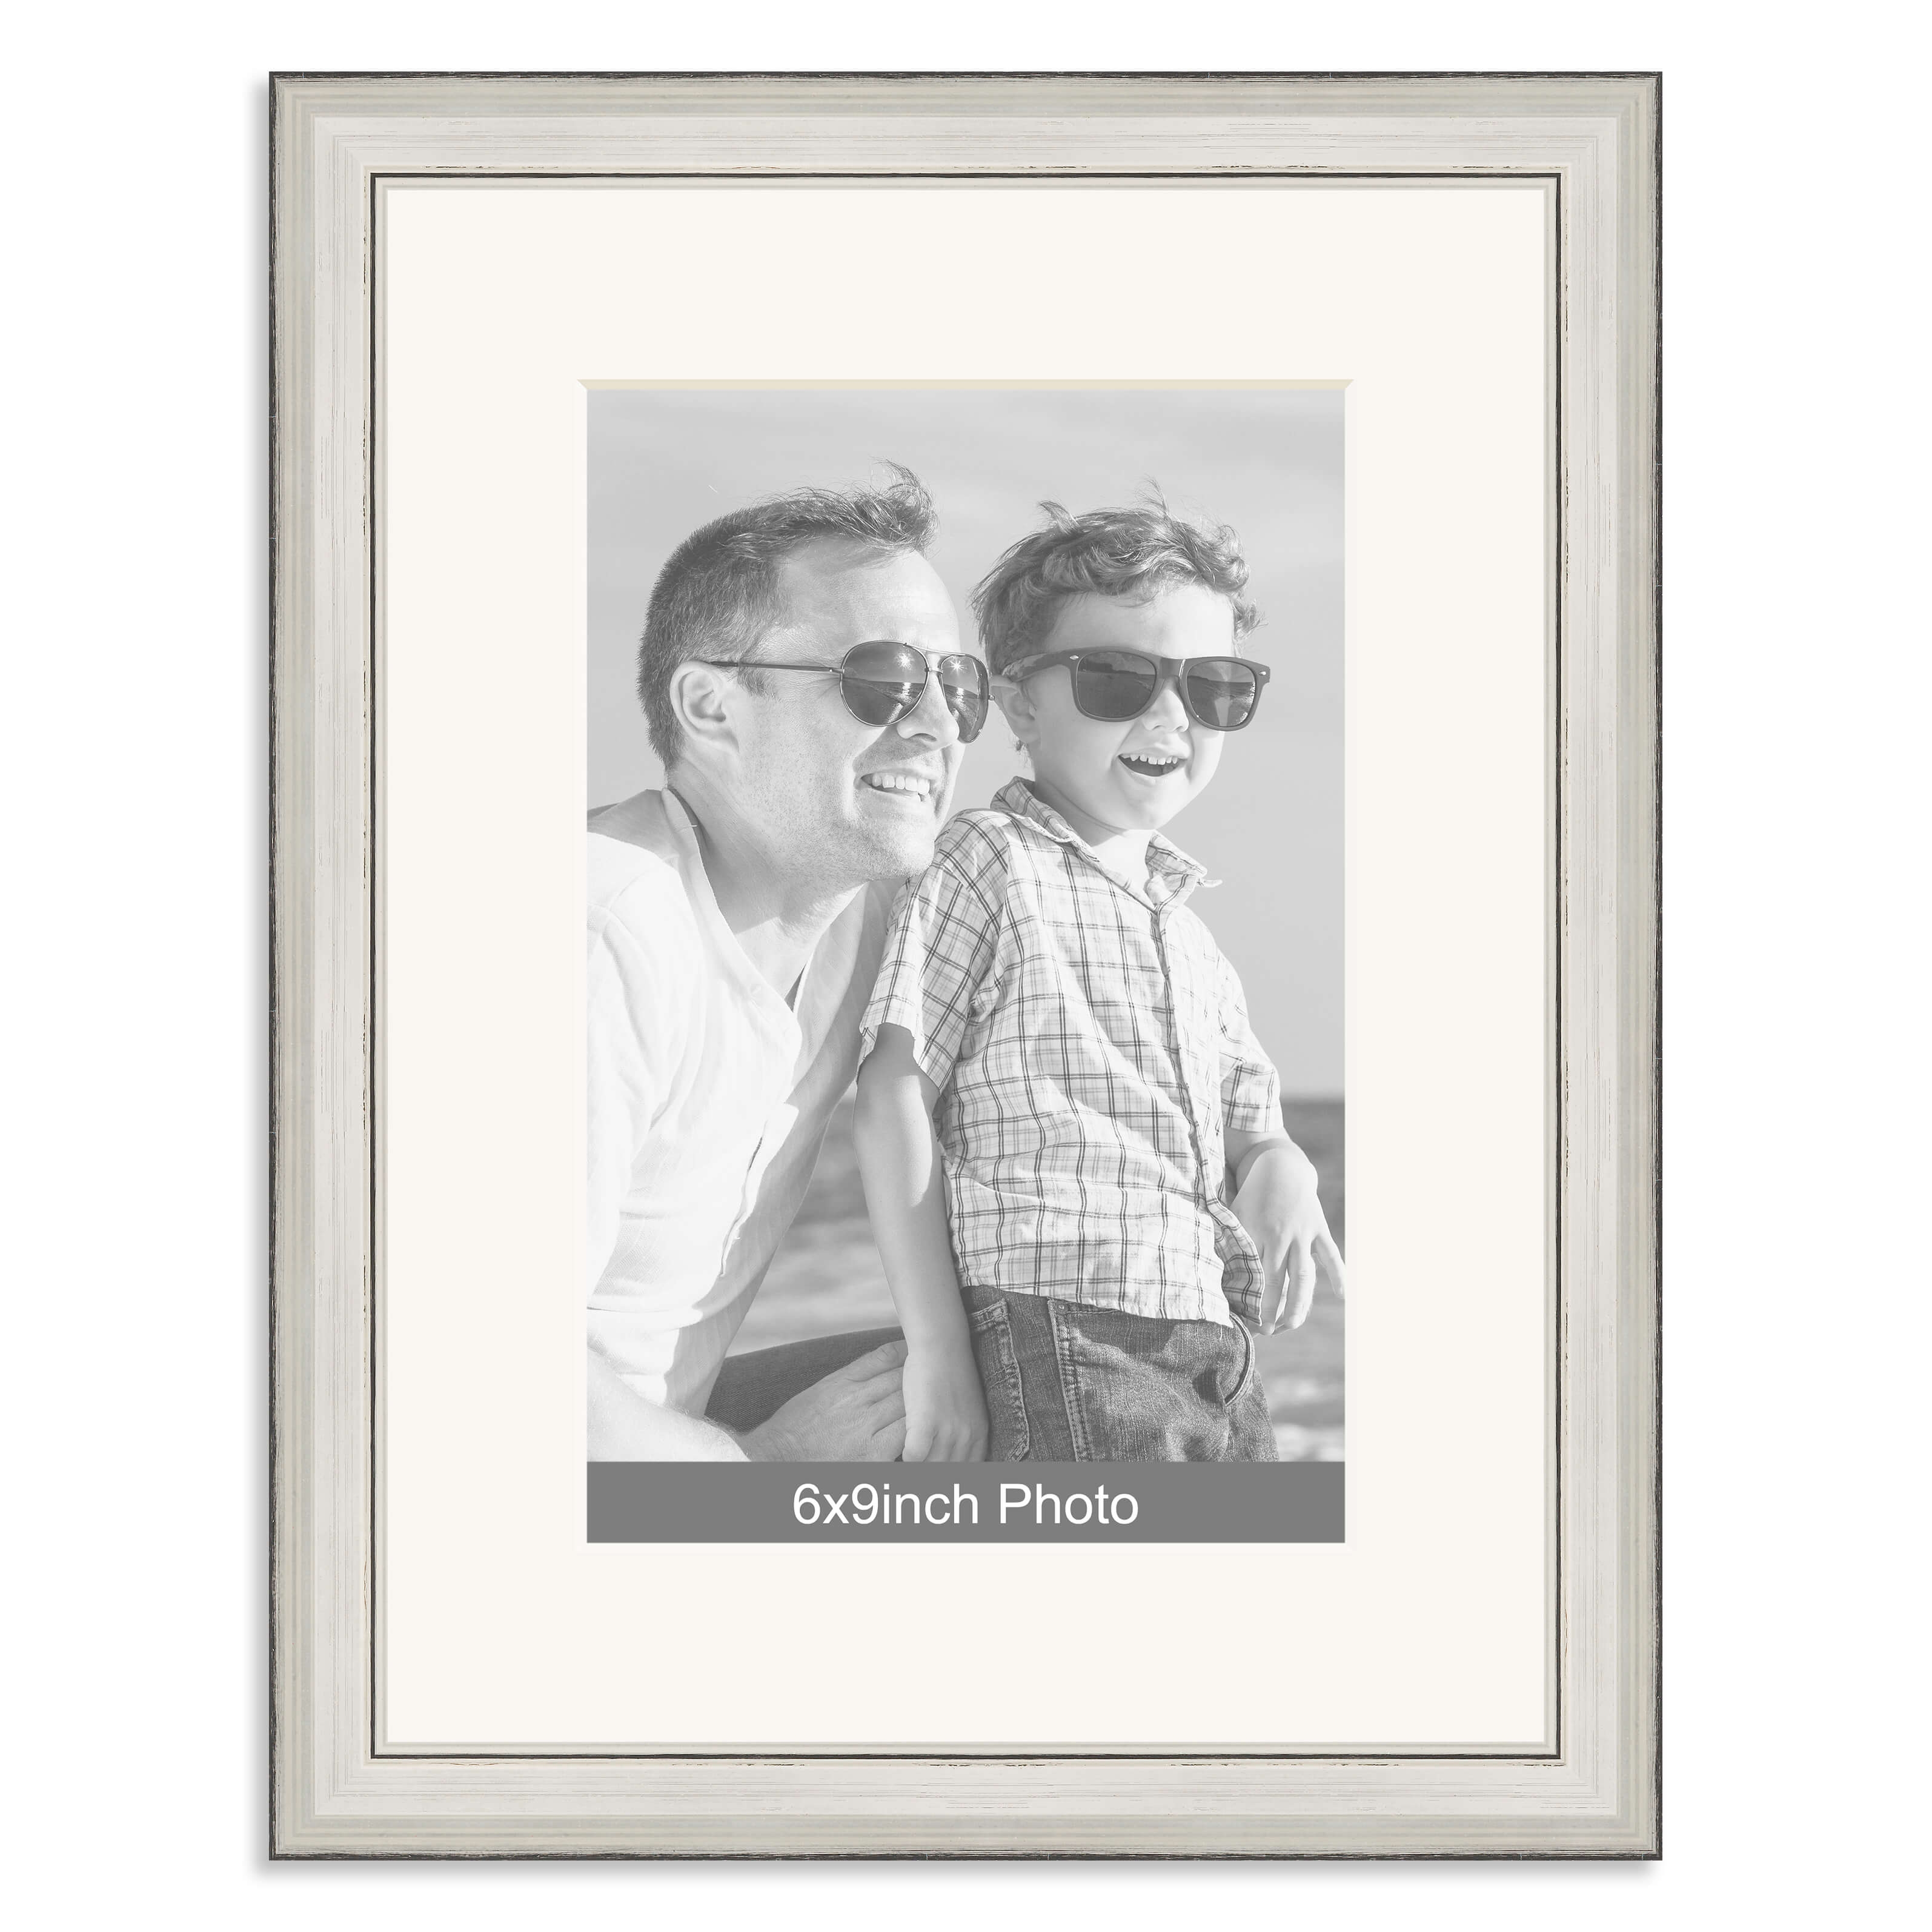 Silver Wooden Photo Frame with mount for a 9×6/6x9in Photo – No Photo required